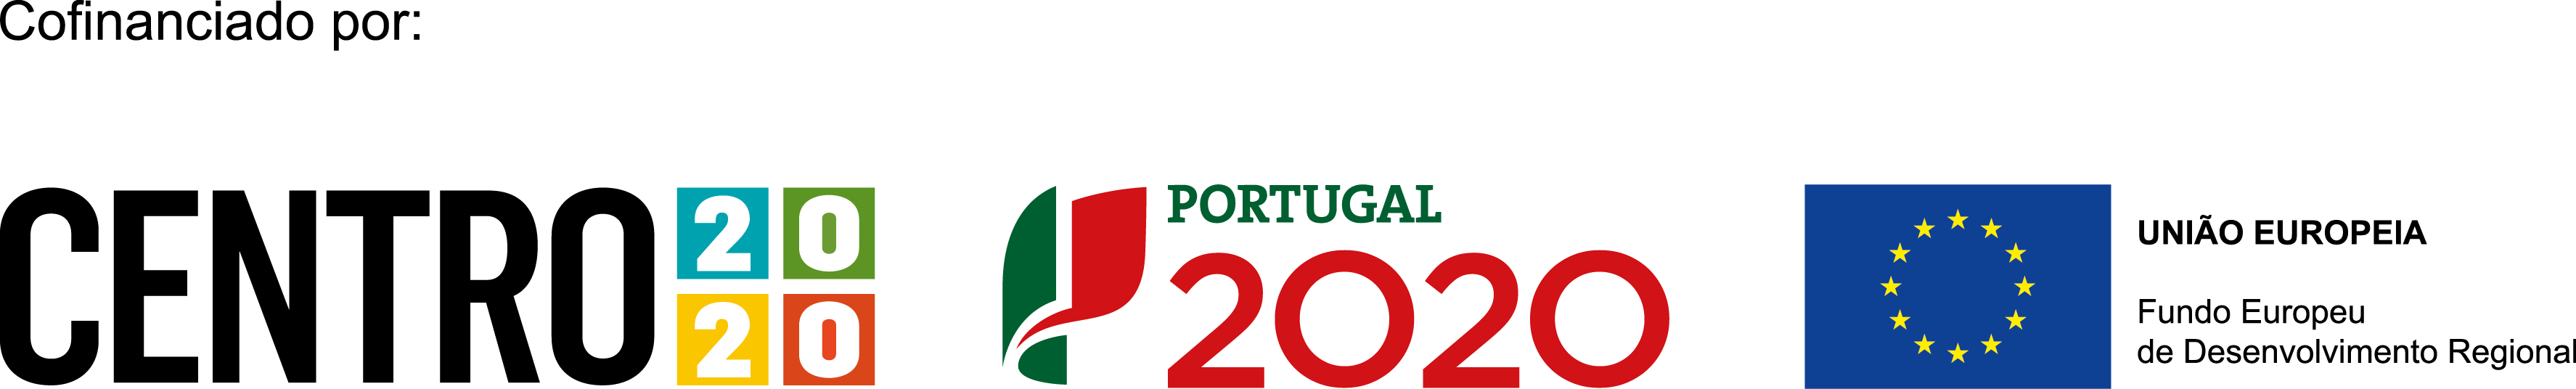 Portugal 2020 funds logos